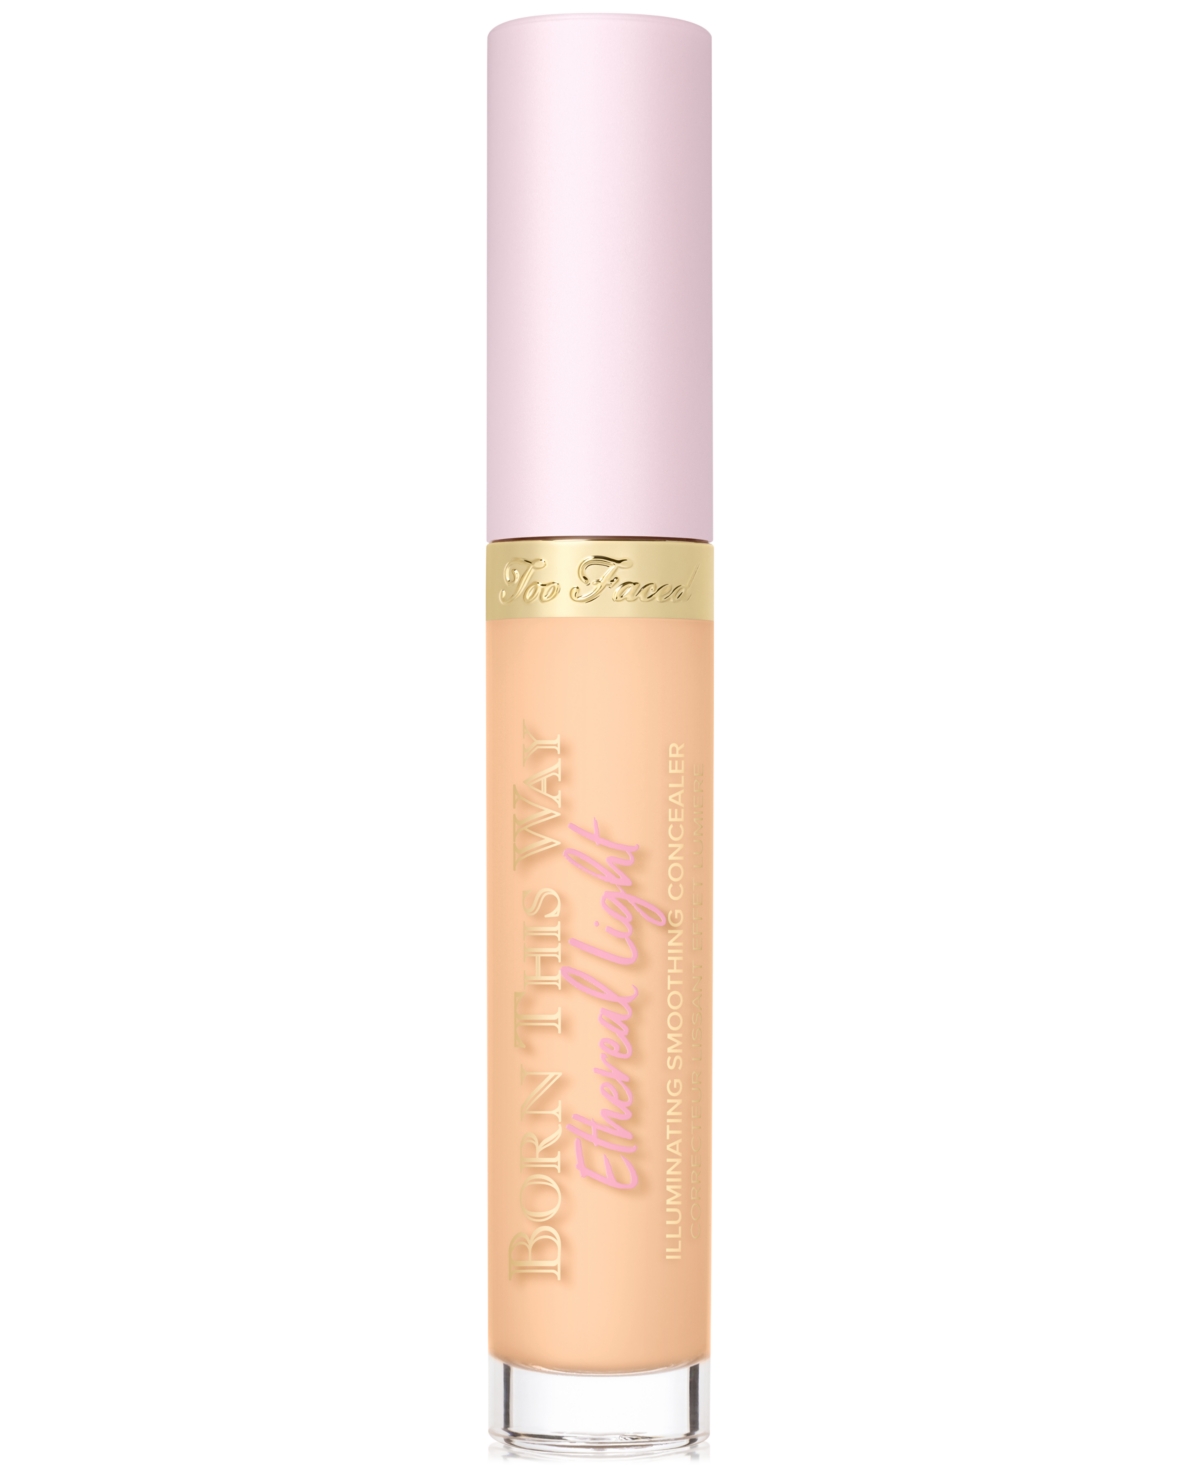 Too Faced Born This Way Ethereal Light Illuminating Smoothing Concealer In Butter Croissant - Light Medium With Gol